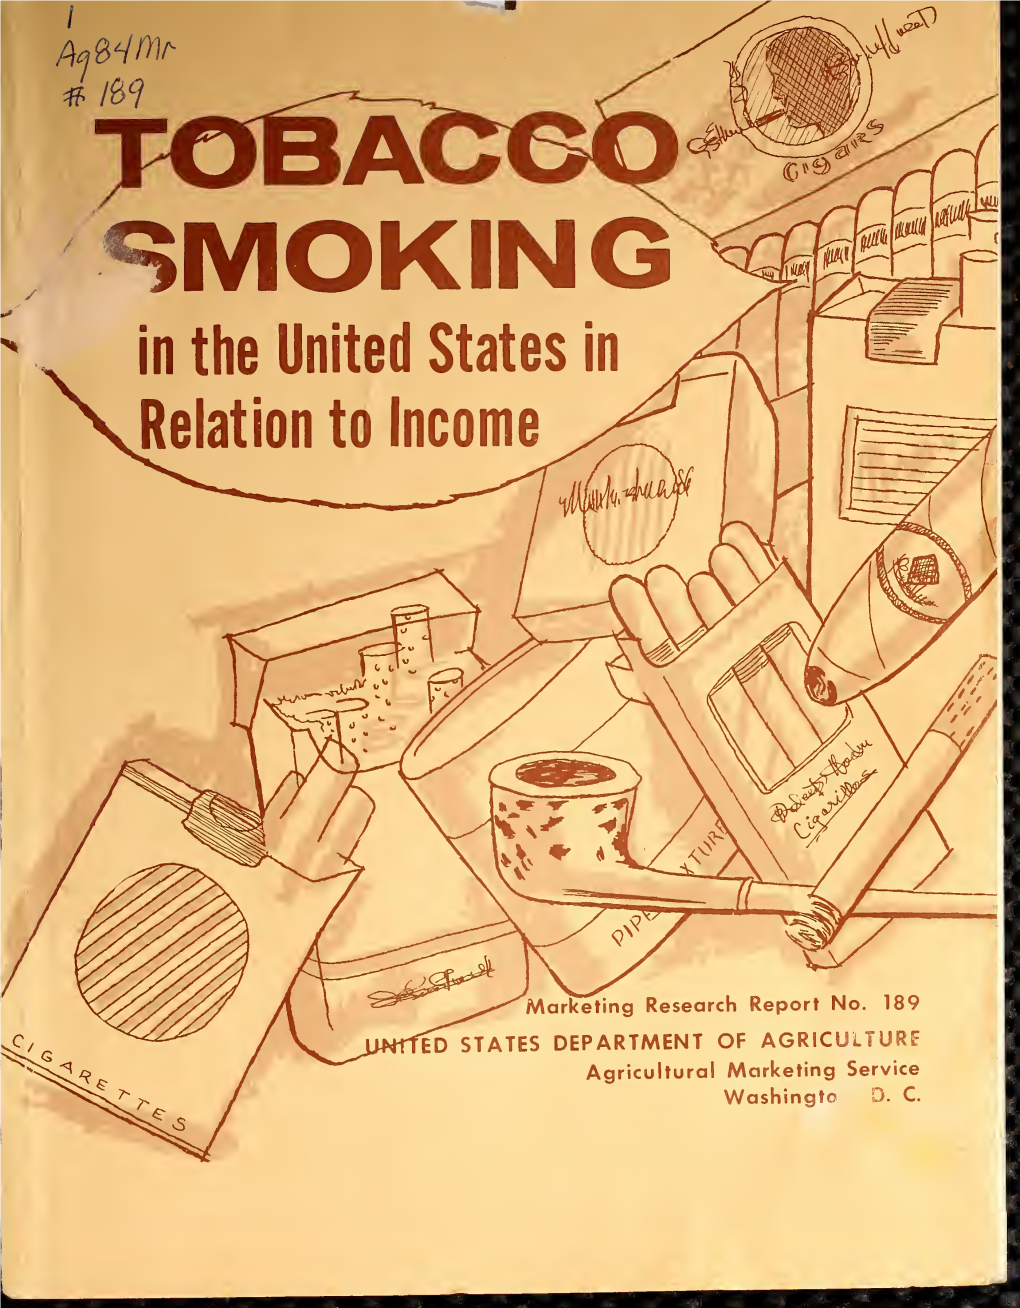 Tobacco Smoking in the United States in Relation to Income